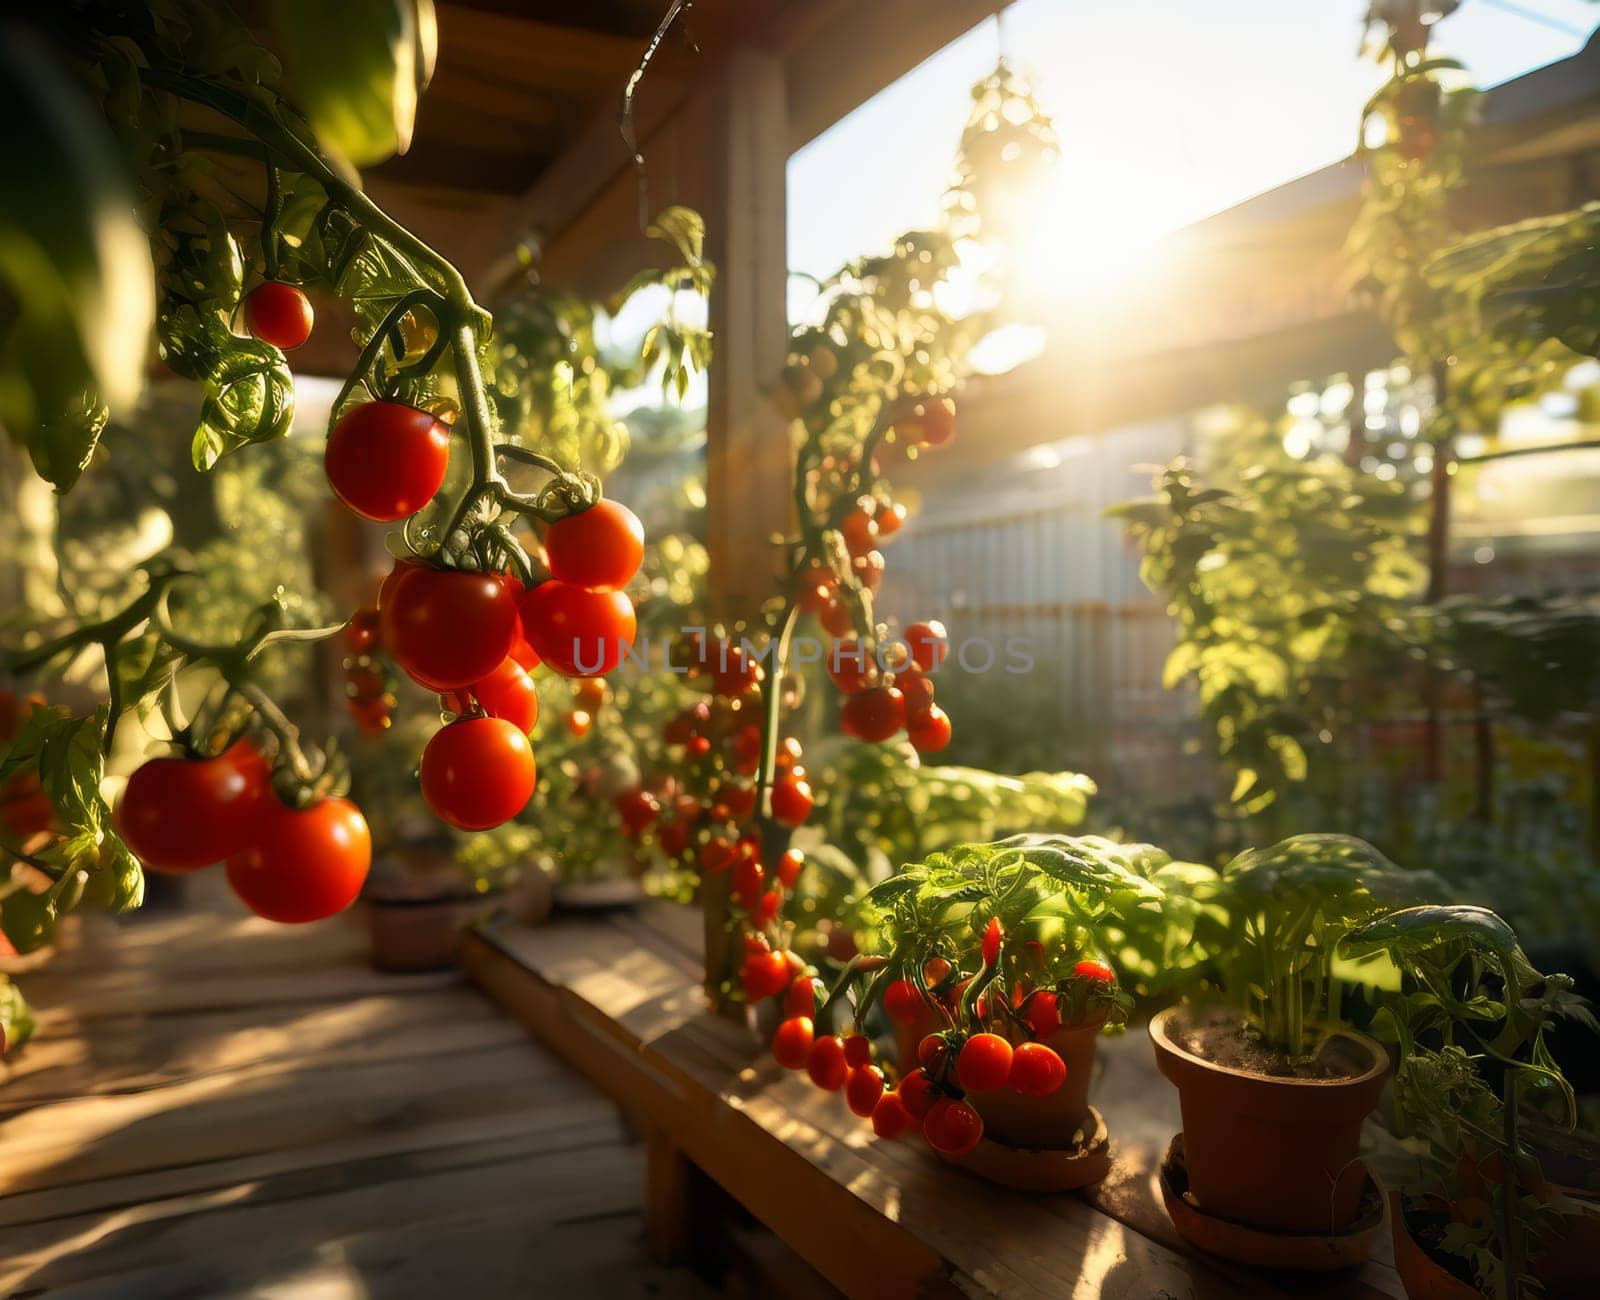 Balcony garden with cherry tomatoes. Close up view of bunch of red delicious ripe cherry tomatoes growing on balcony garden in city. Balcony urban gardening concept